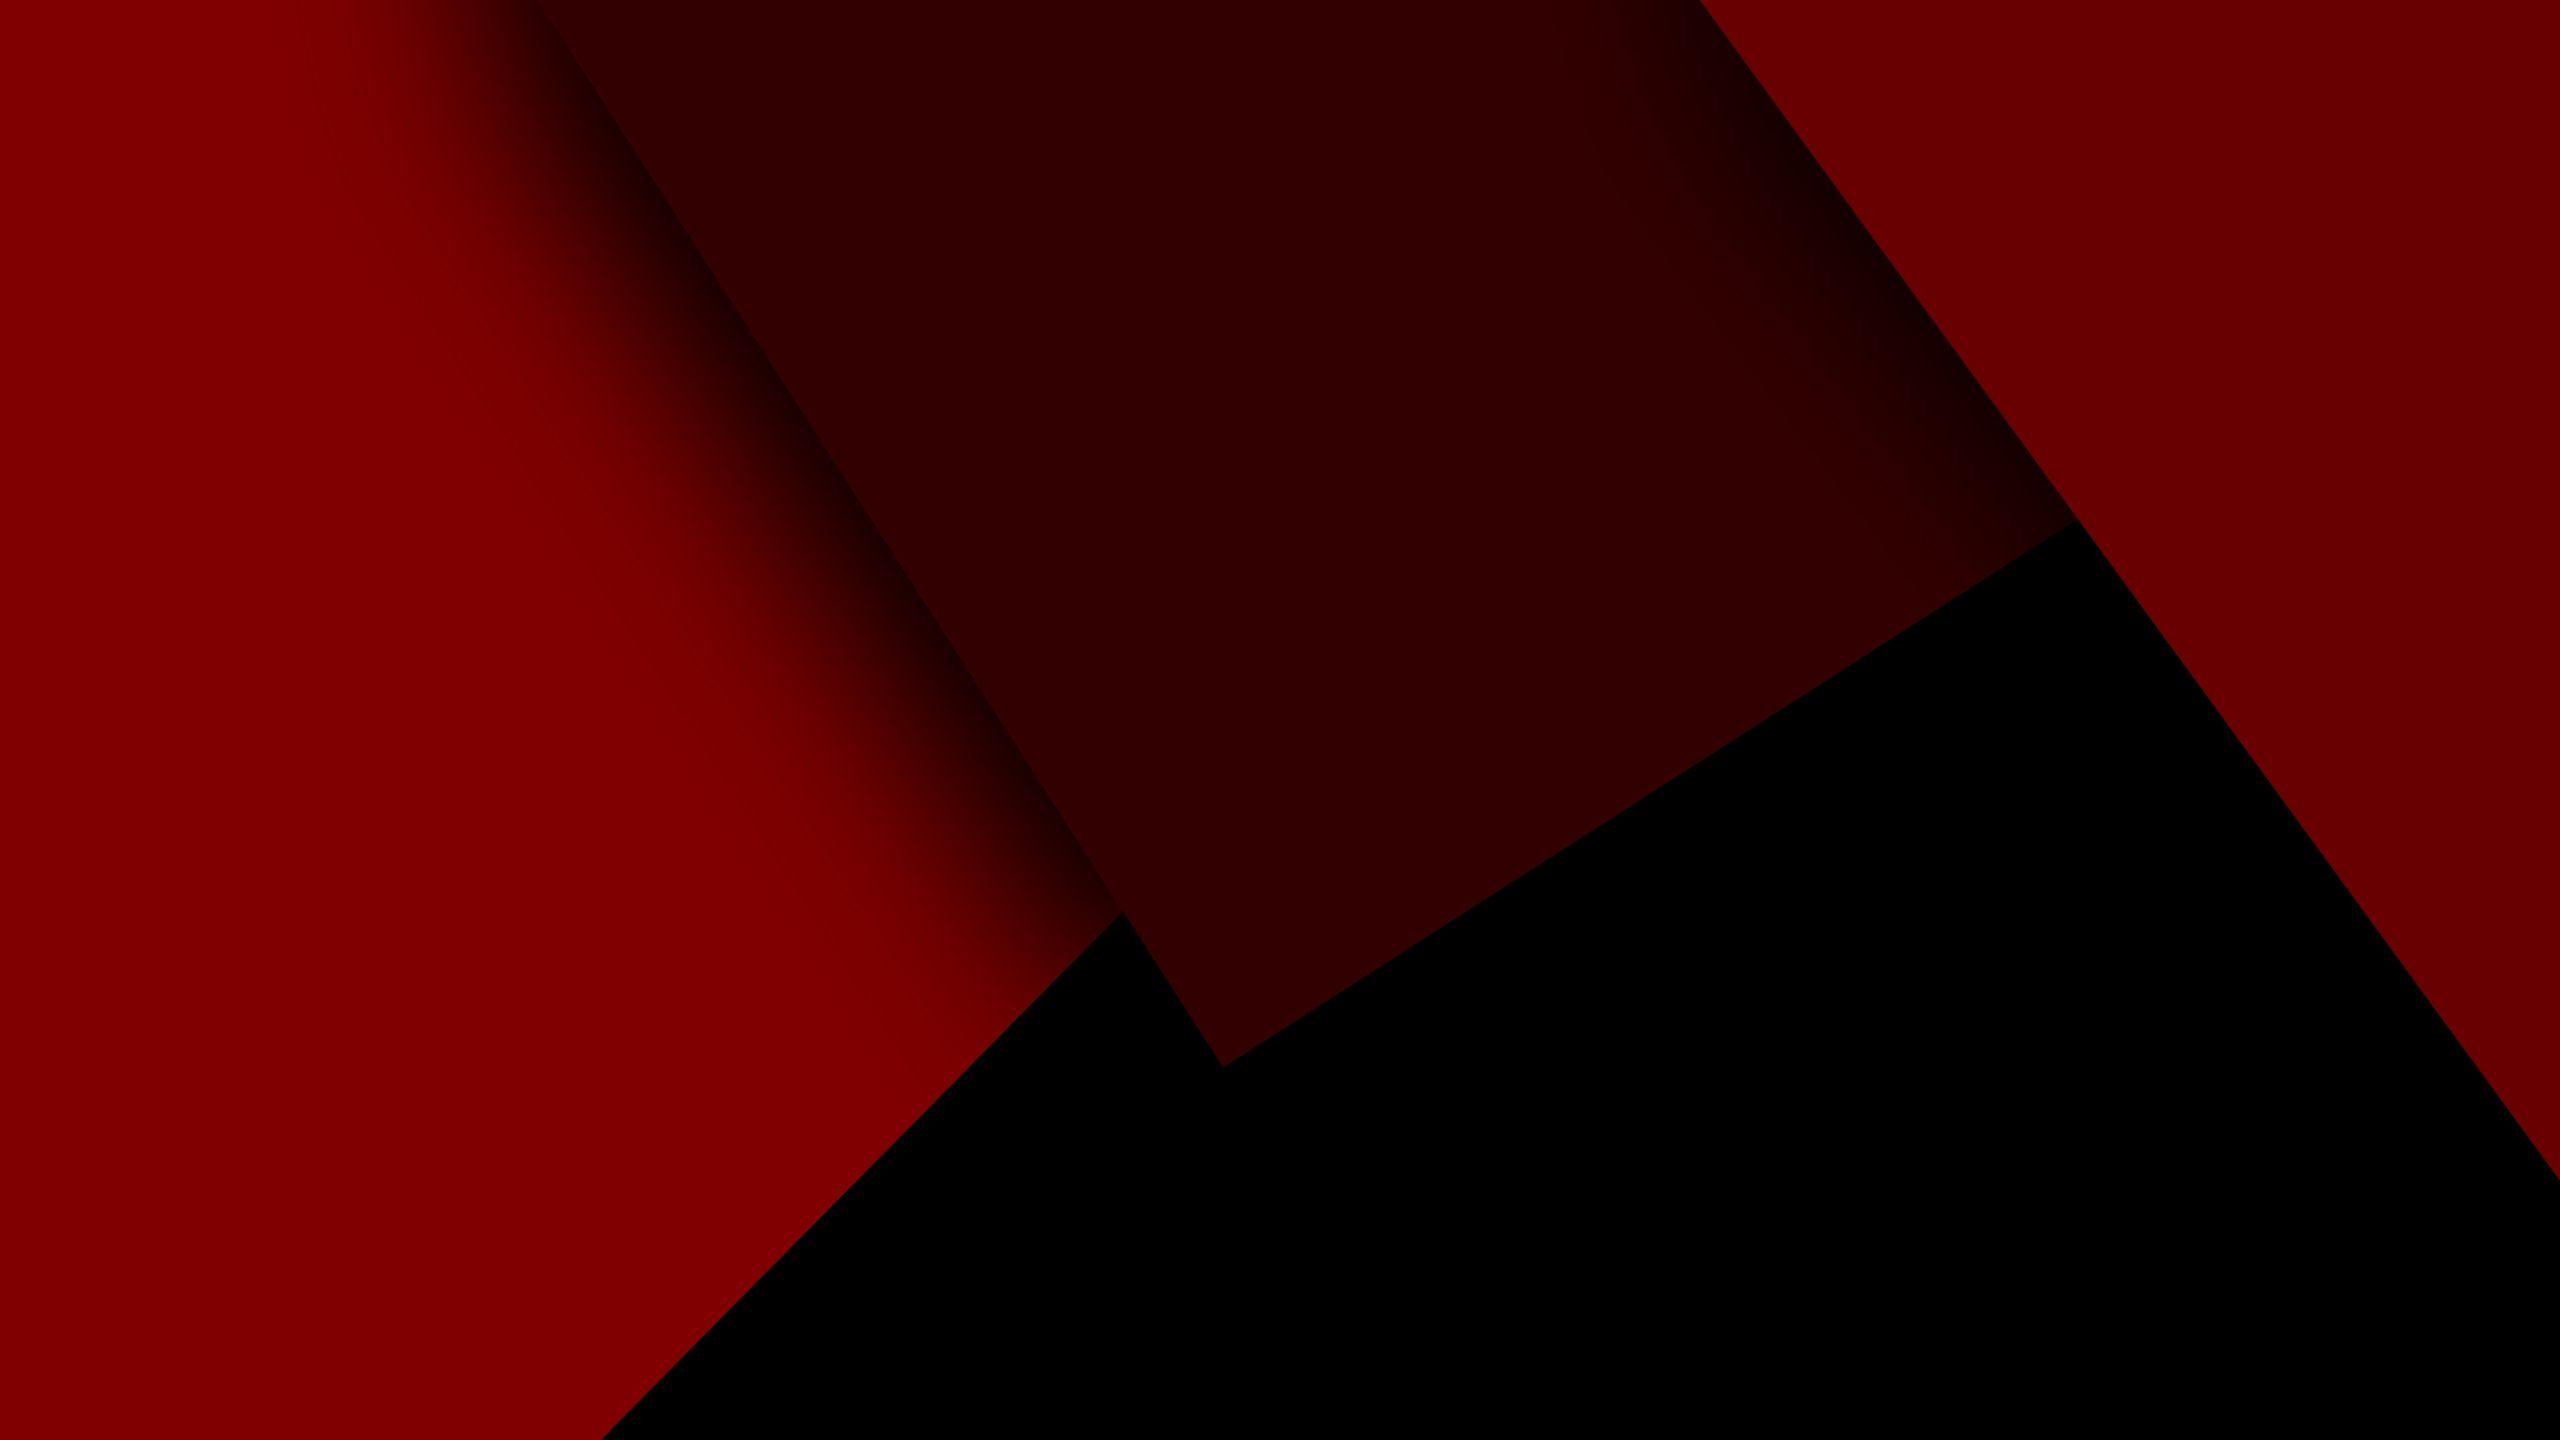 Red and Black Abstract Wallpapers - Top Free Red and Black Abstract